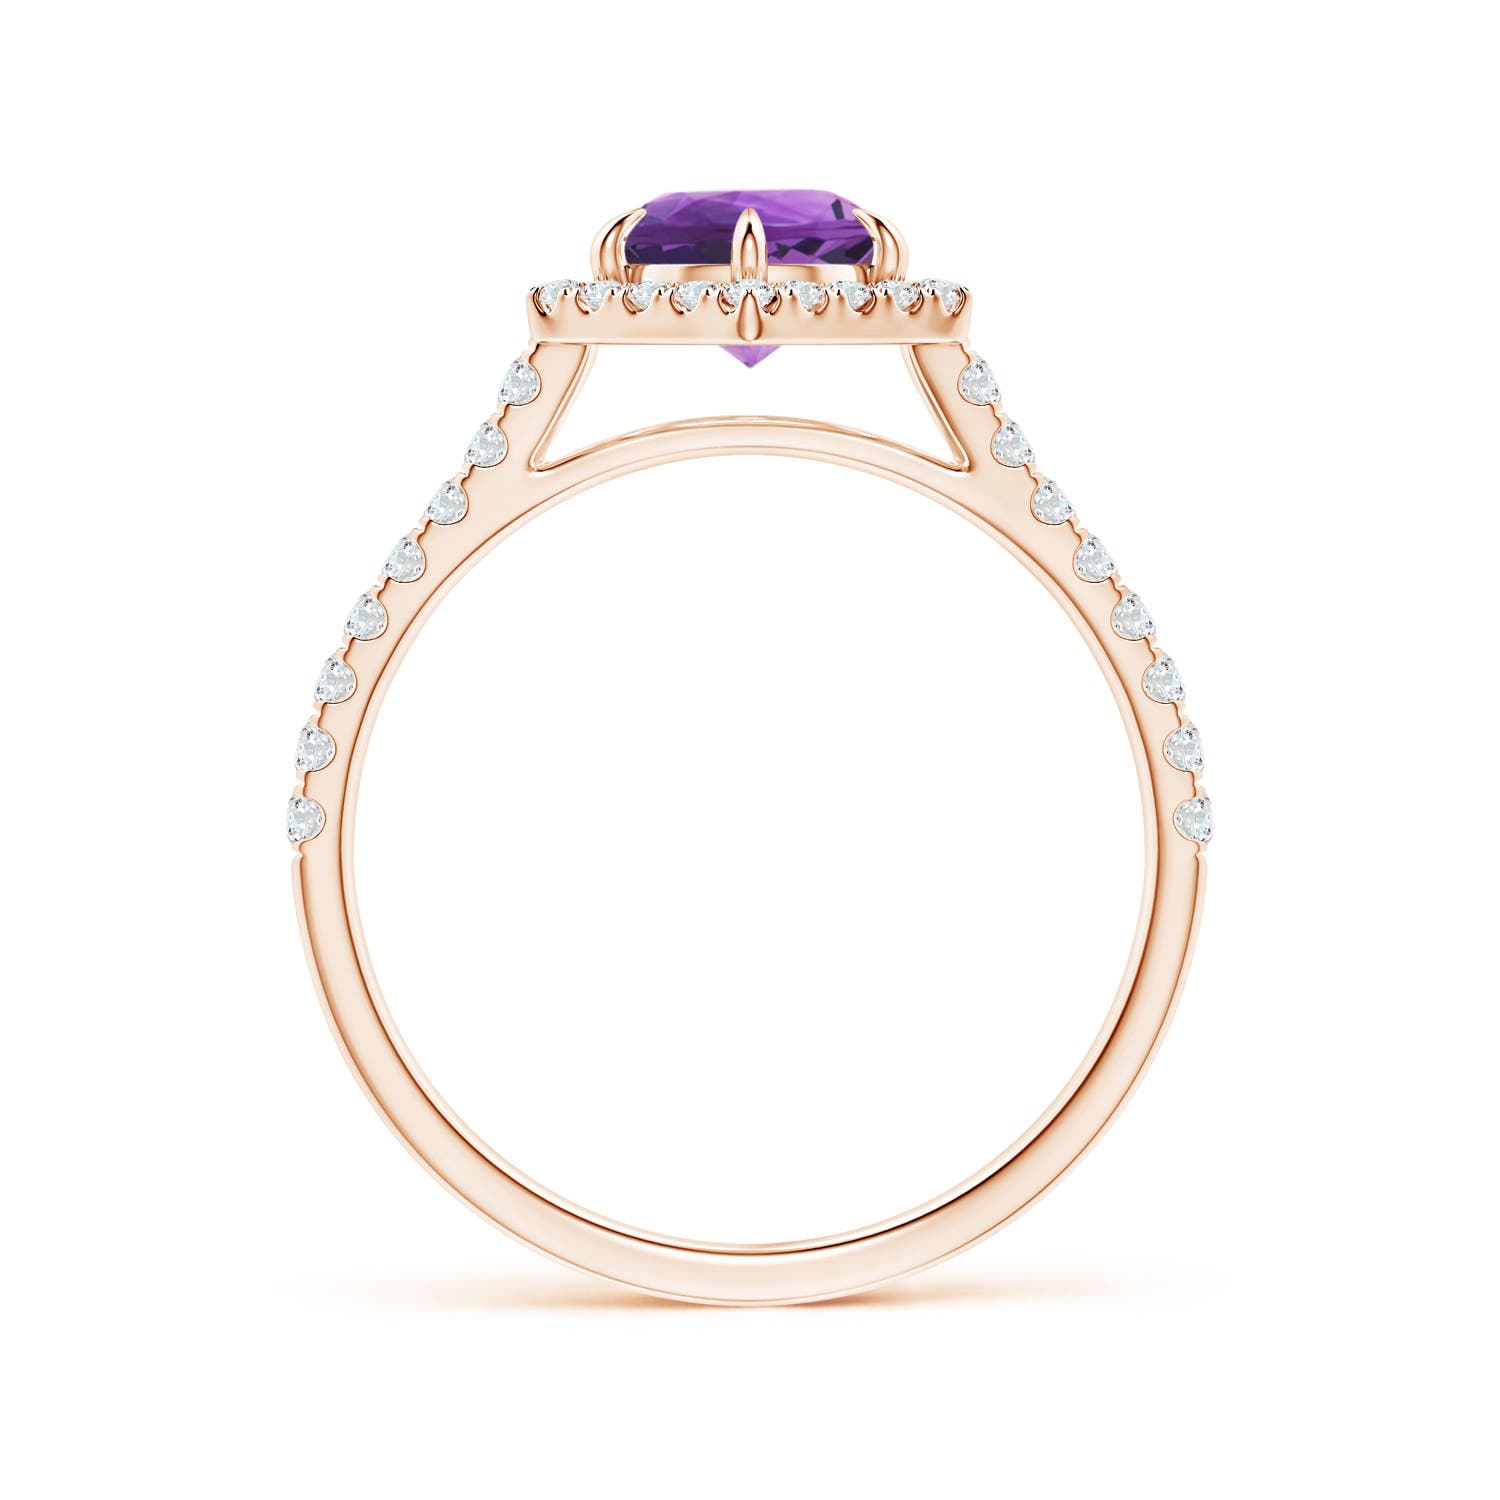 AAA - Amethyst / 1.14 CT / 14 KT Rose Gold